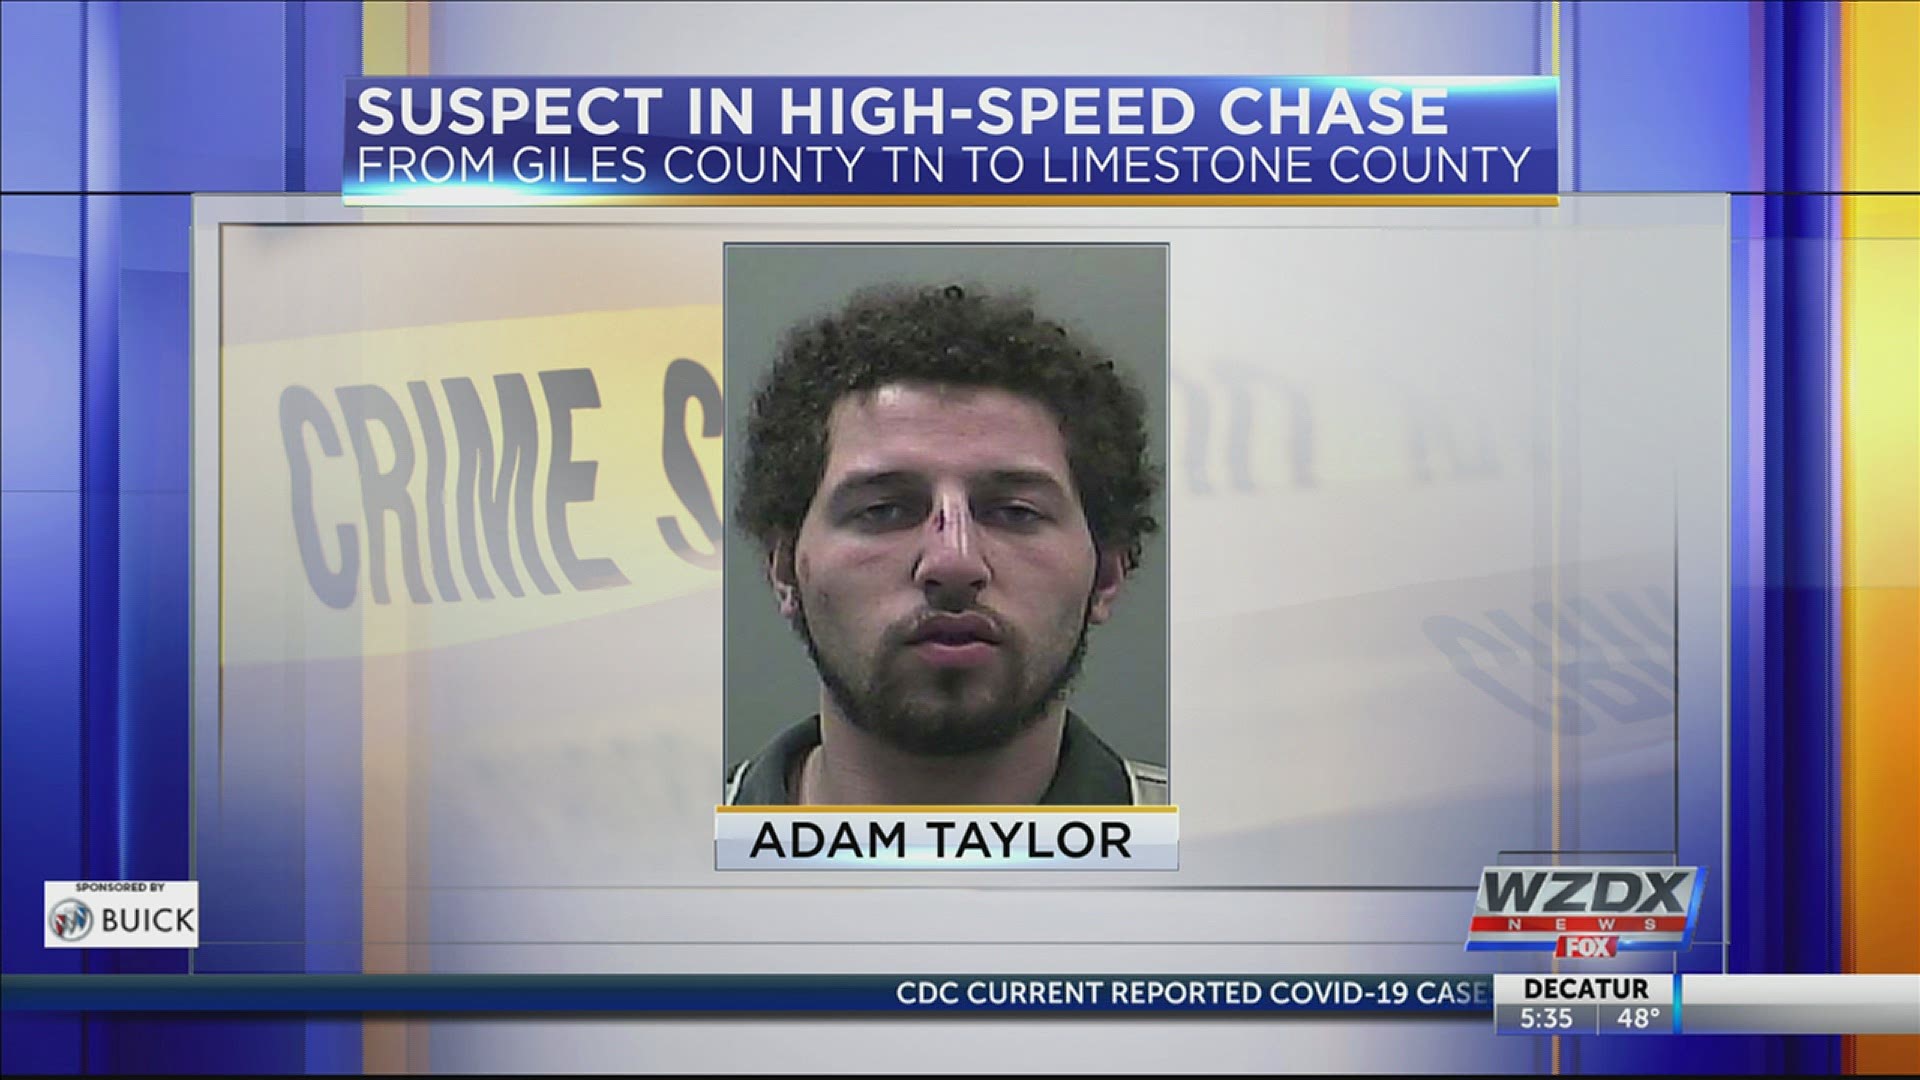 LCSO said the suspect reached speeds upwards of 120 mph and had forced several vehicles off the road.